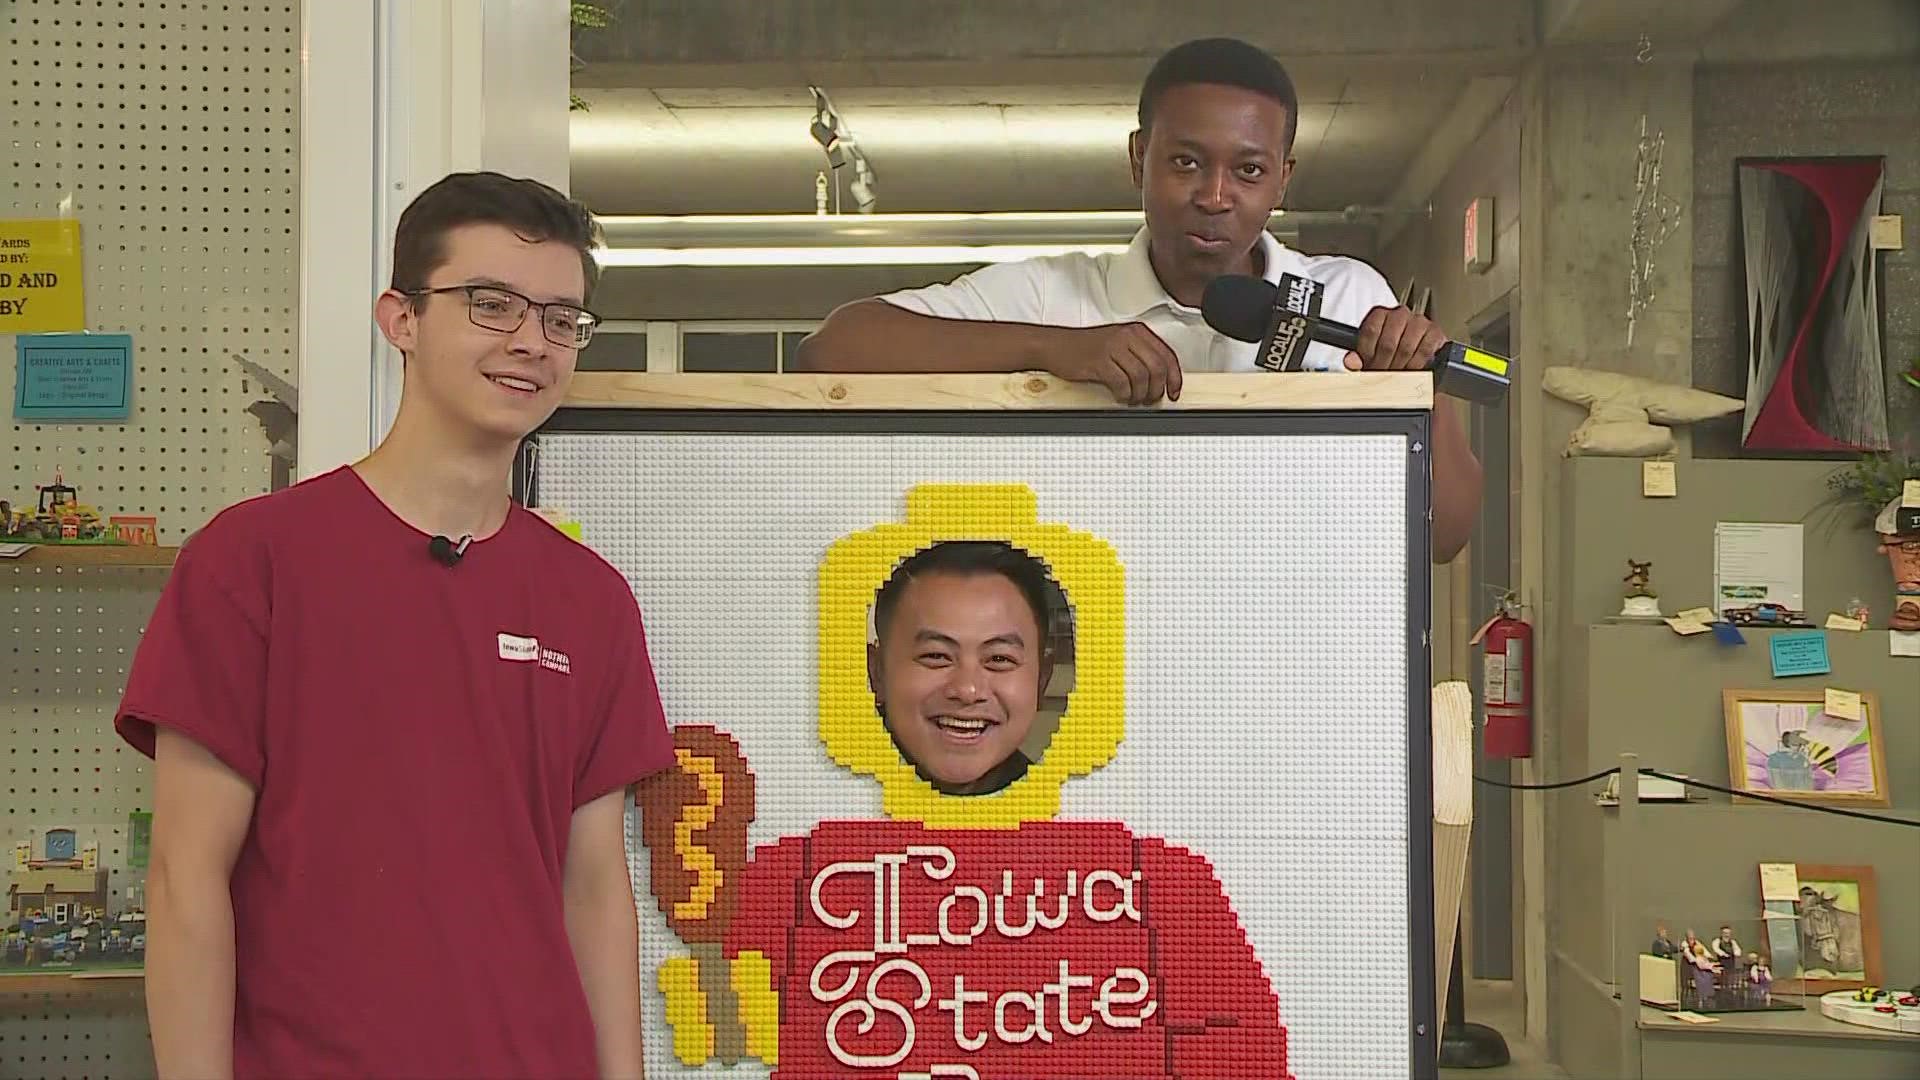 Ethan Gonzalez won the People's Choice Award for his Lego construction at the 2022 Iowa State Fair.